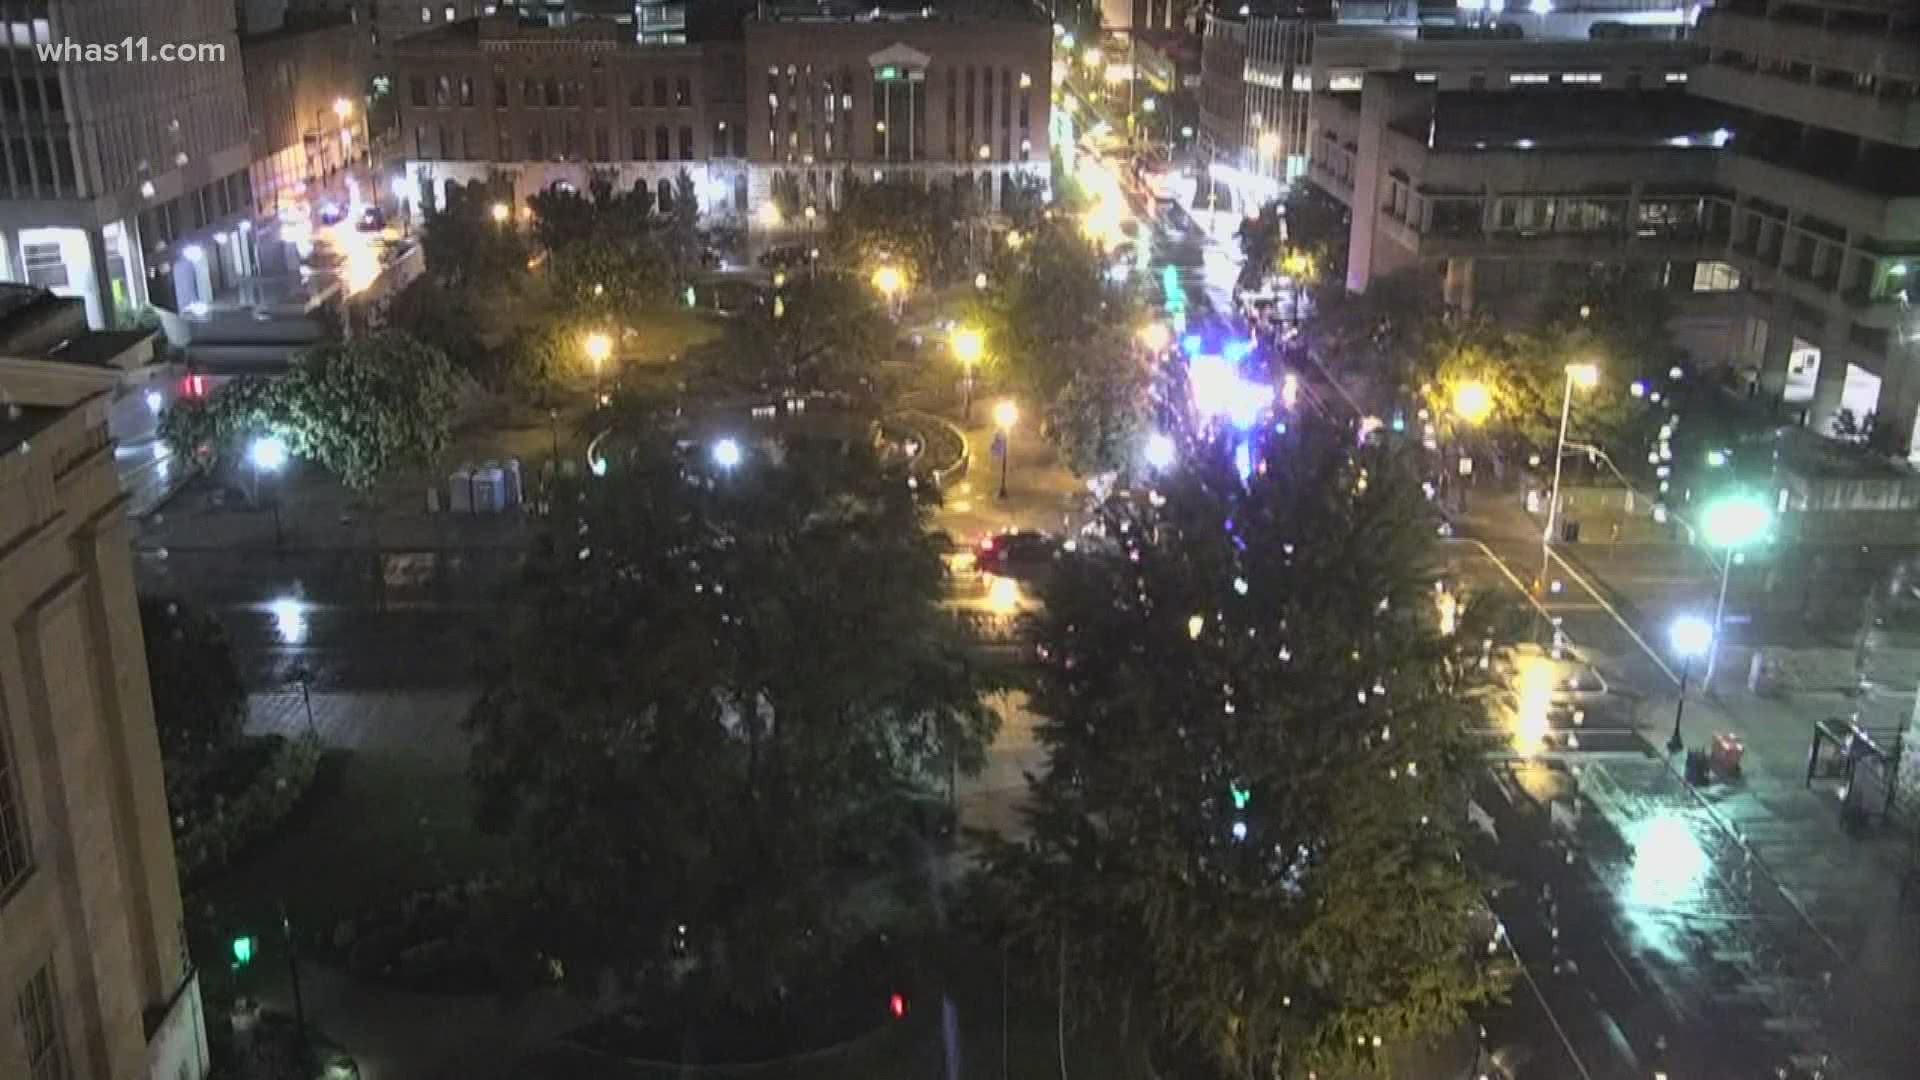 In a statement Thursday, LMPD said upon further review the SWAT car hit a protester's car that was attempting to leave the area.